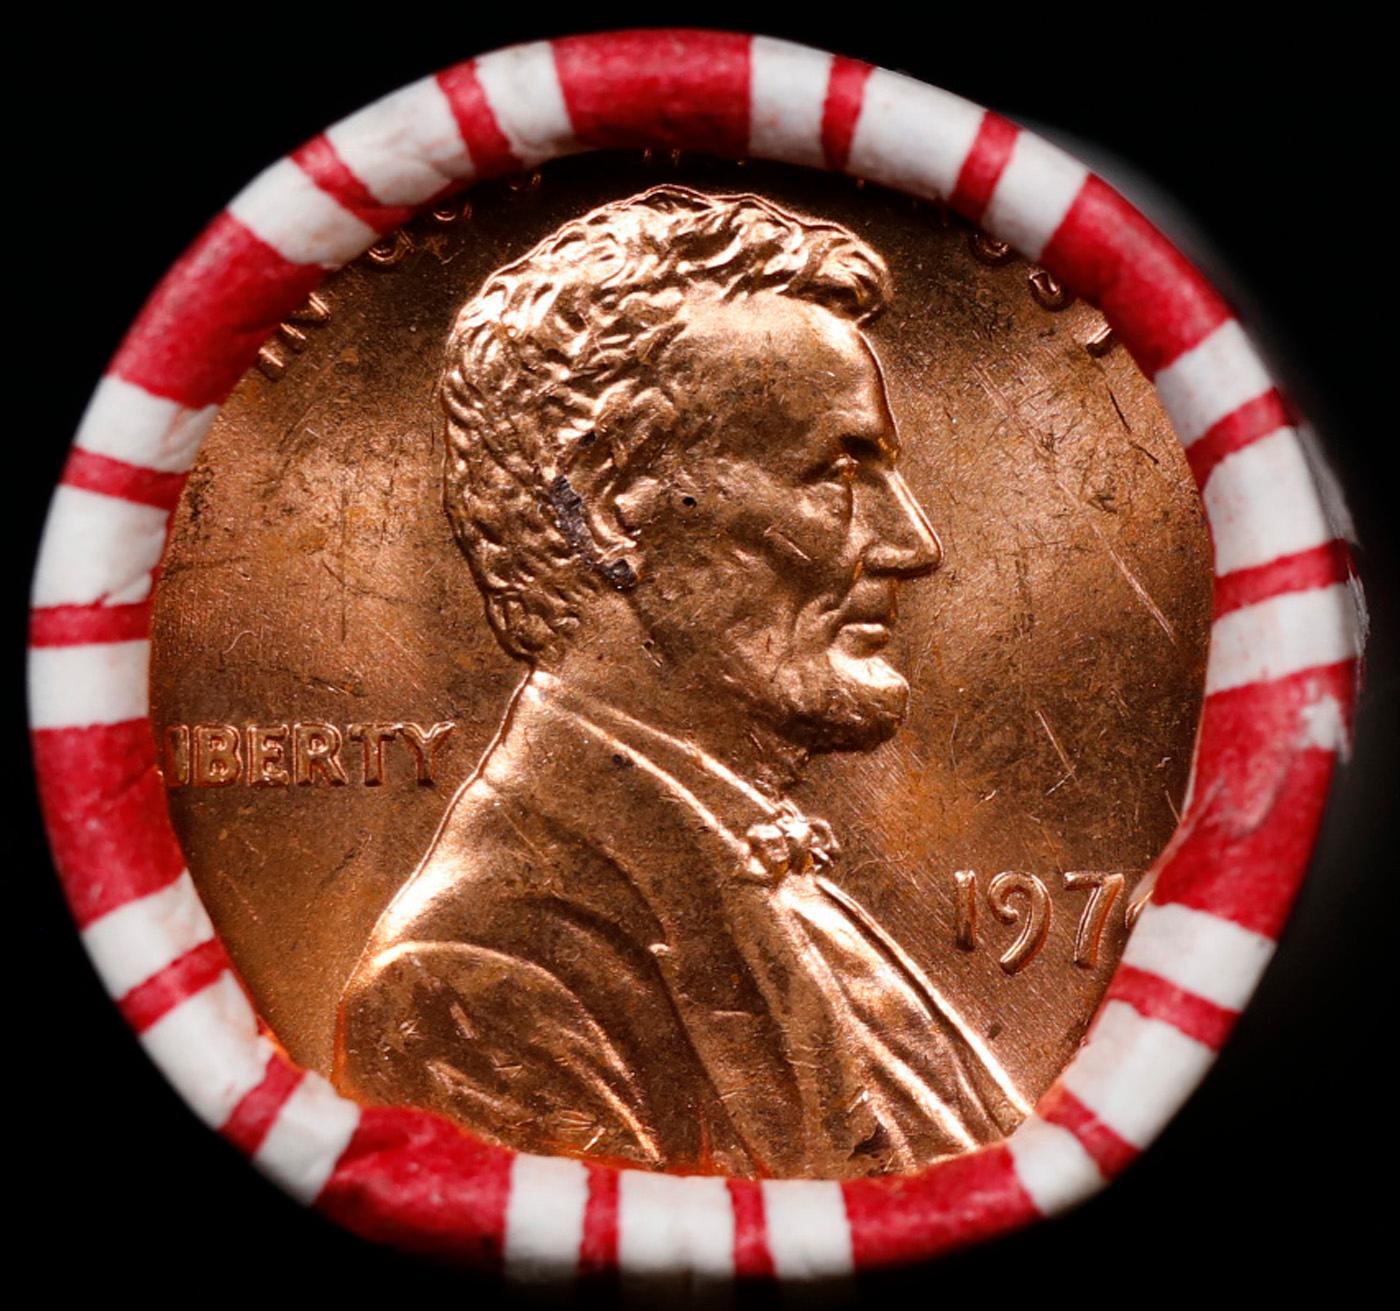 INSANITY The CRAZY Penny Wheel 1000’s won so far, WIN this 1974-p BU RED roll get 1-10 FREE